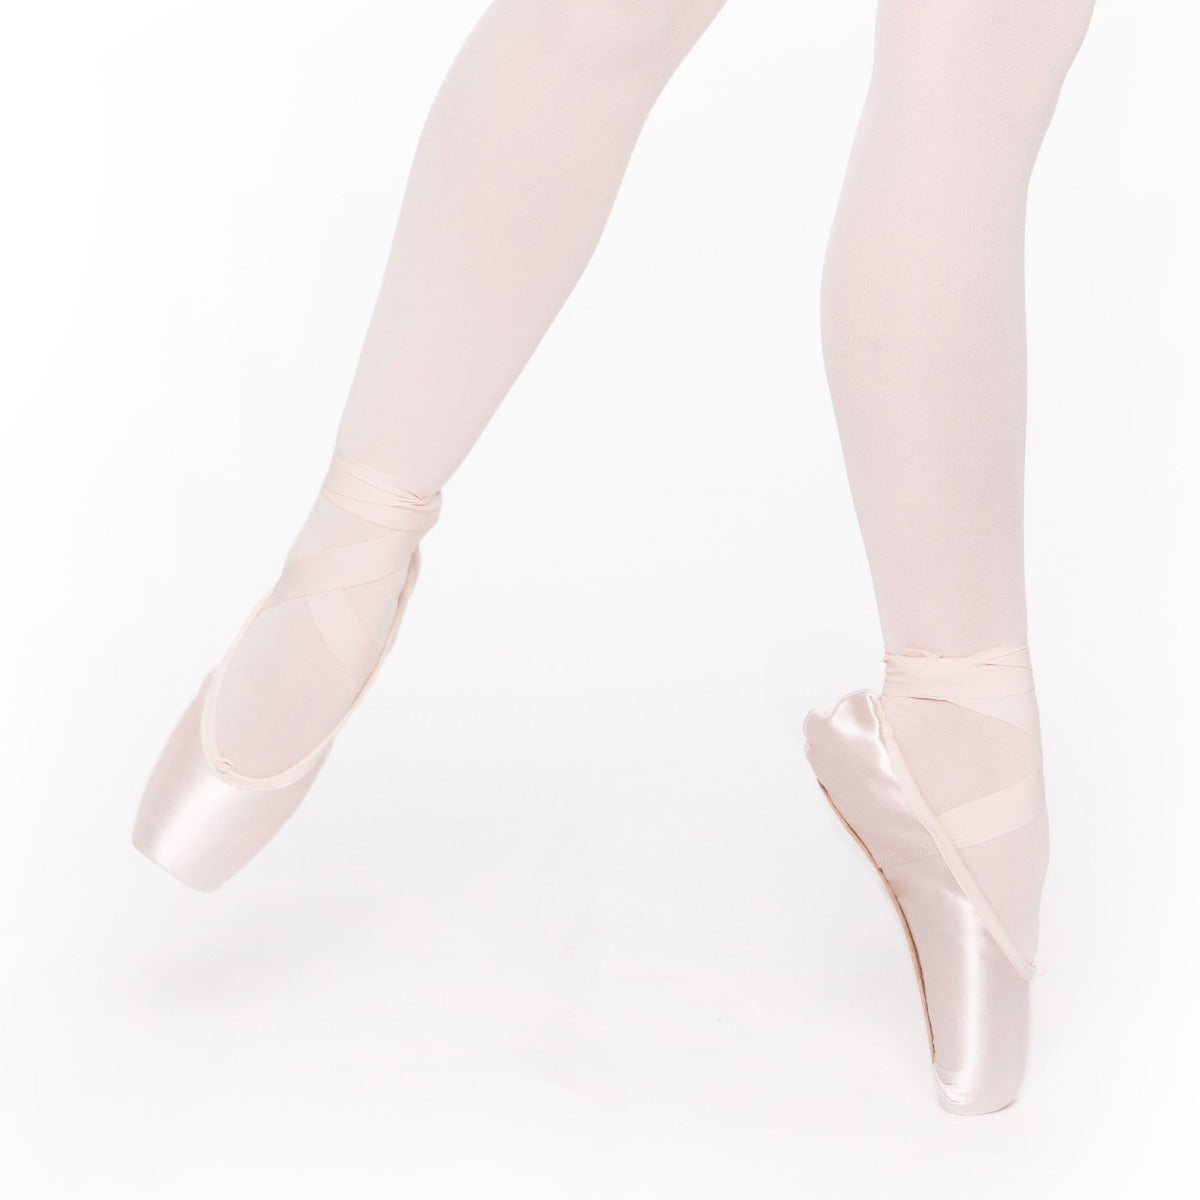 Mabe U-Cut Pointe Shoes with Drawstring